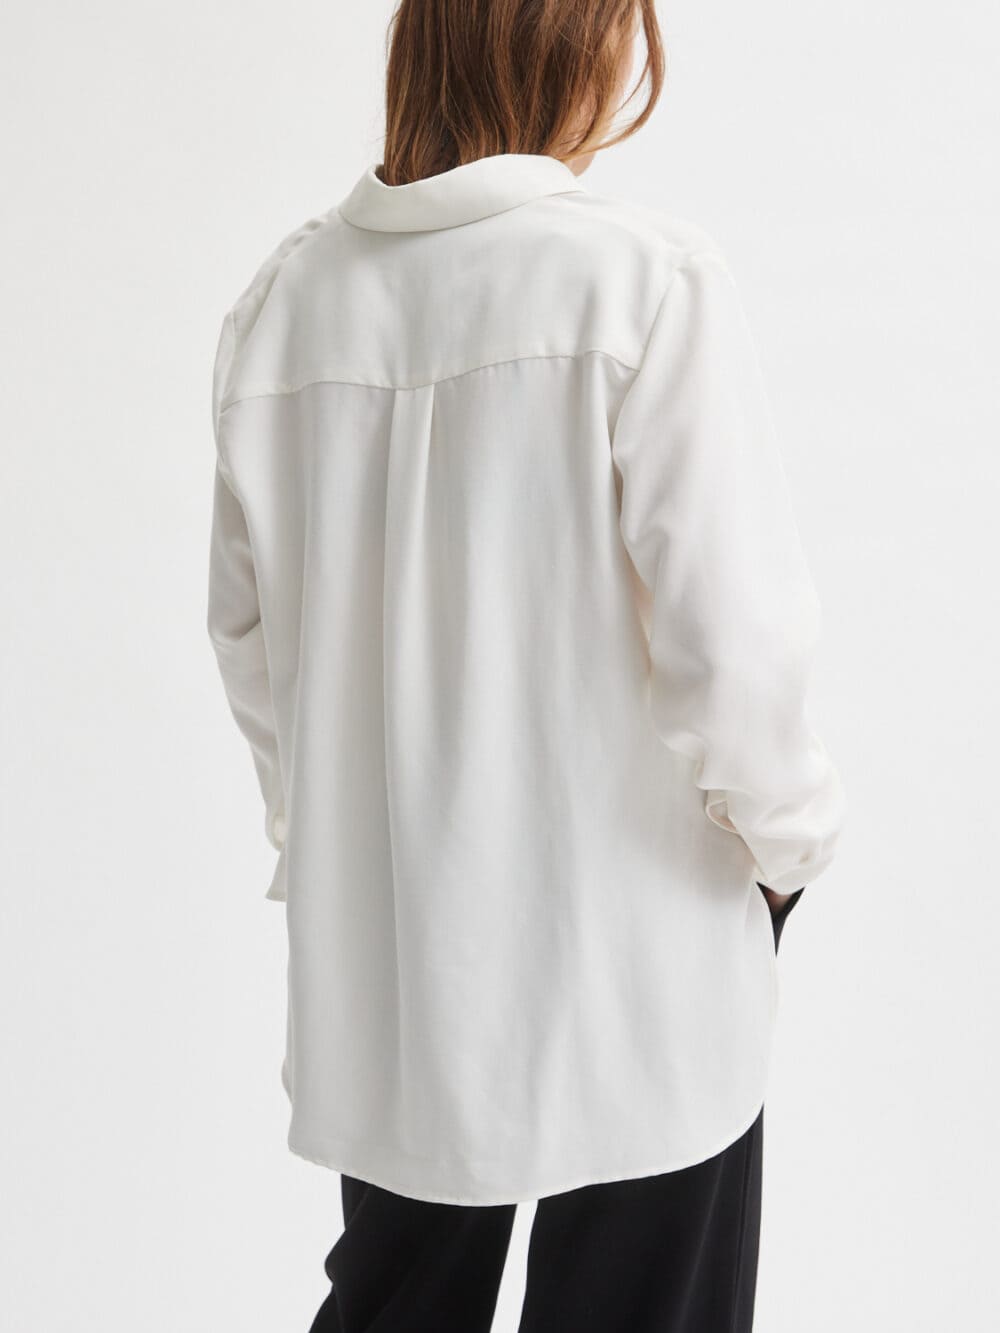 Daily Shirt Soft Modal White | A PART OF THE ART